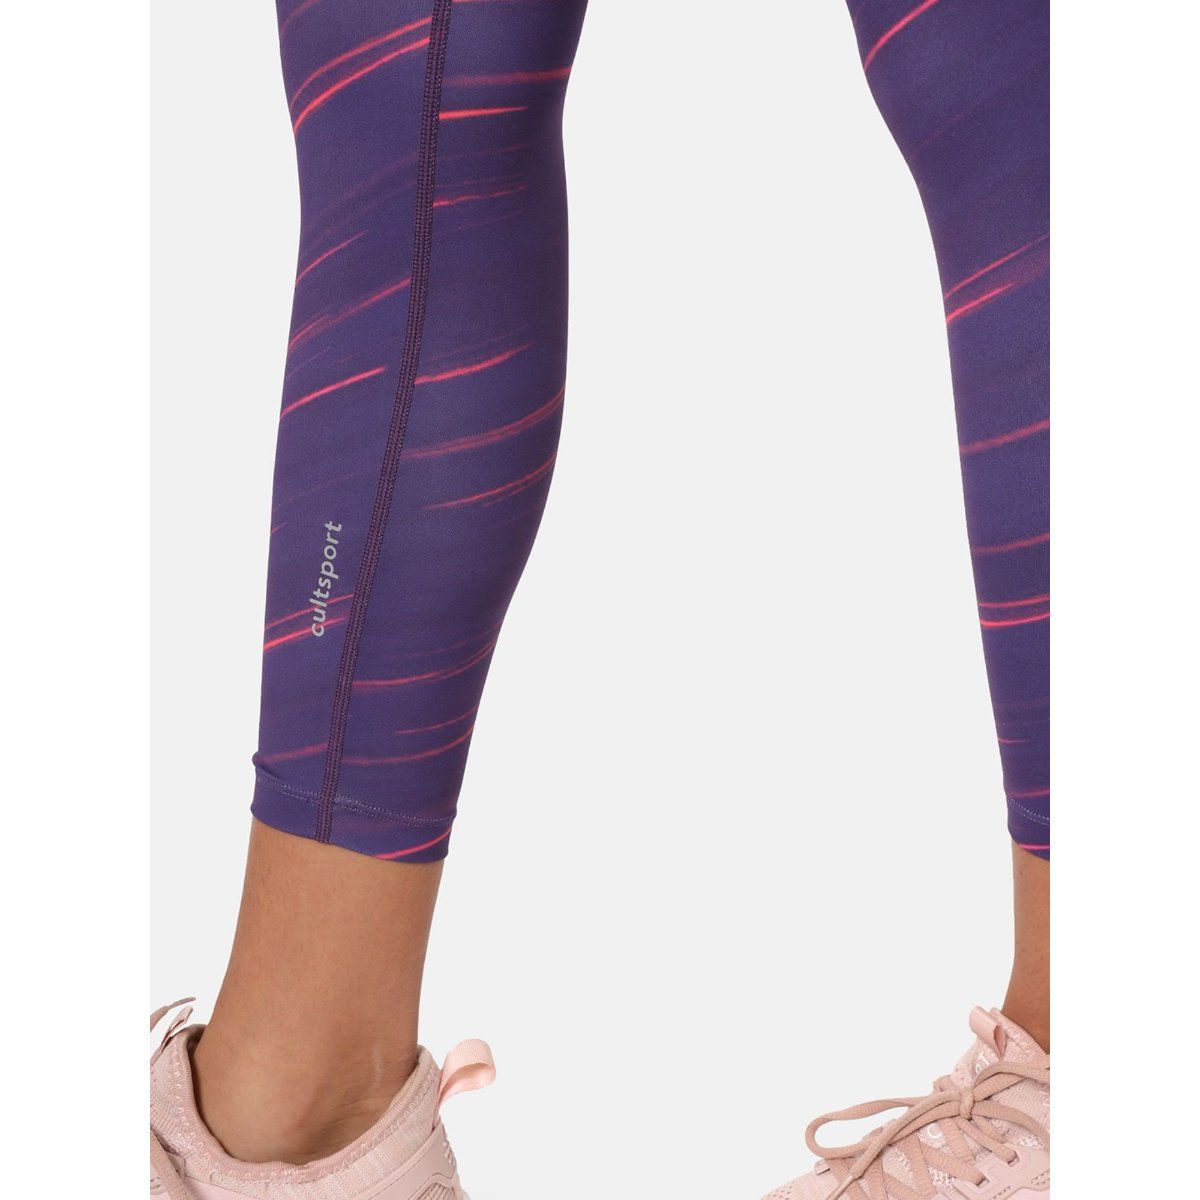 Shiny High-Waisted Leggings KATRIN PURPLE – Women's leggings at affordable  prices from Miss Leelas